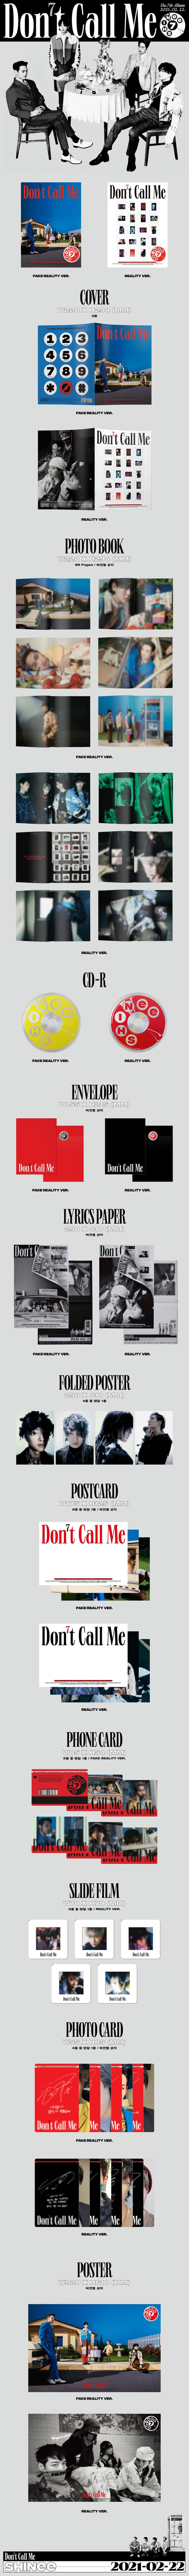 1 CD
1 Folding Poster On Pack
1 Photo Book (88 pages)
1 Lyrics Paper
1 Post
1 Phonecard Or Film
1 Card